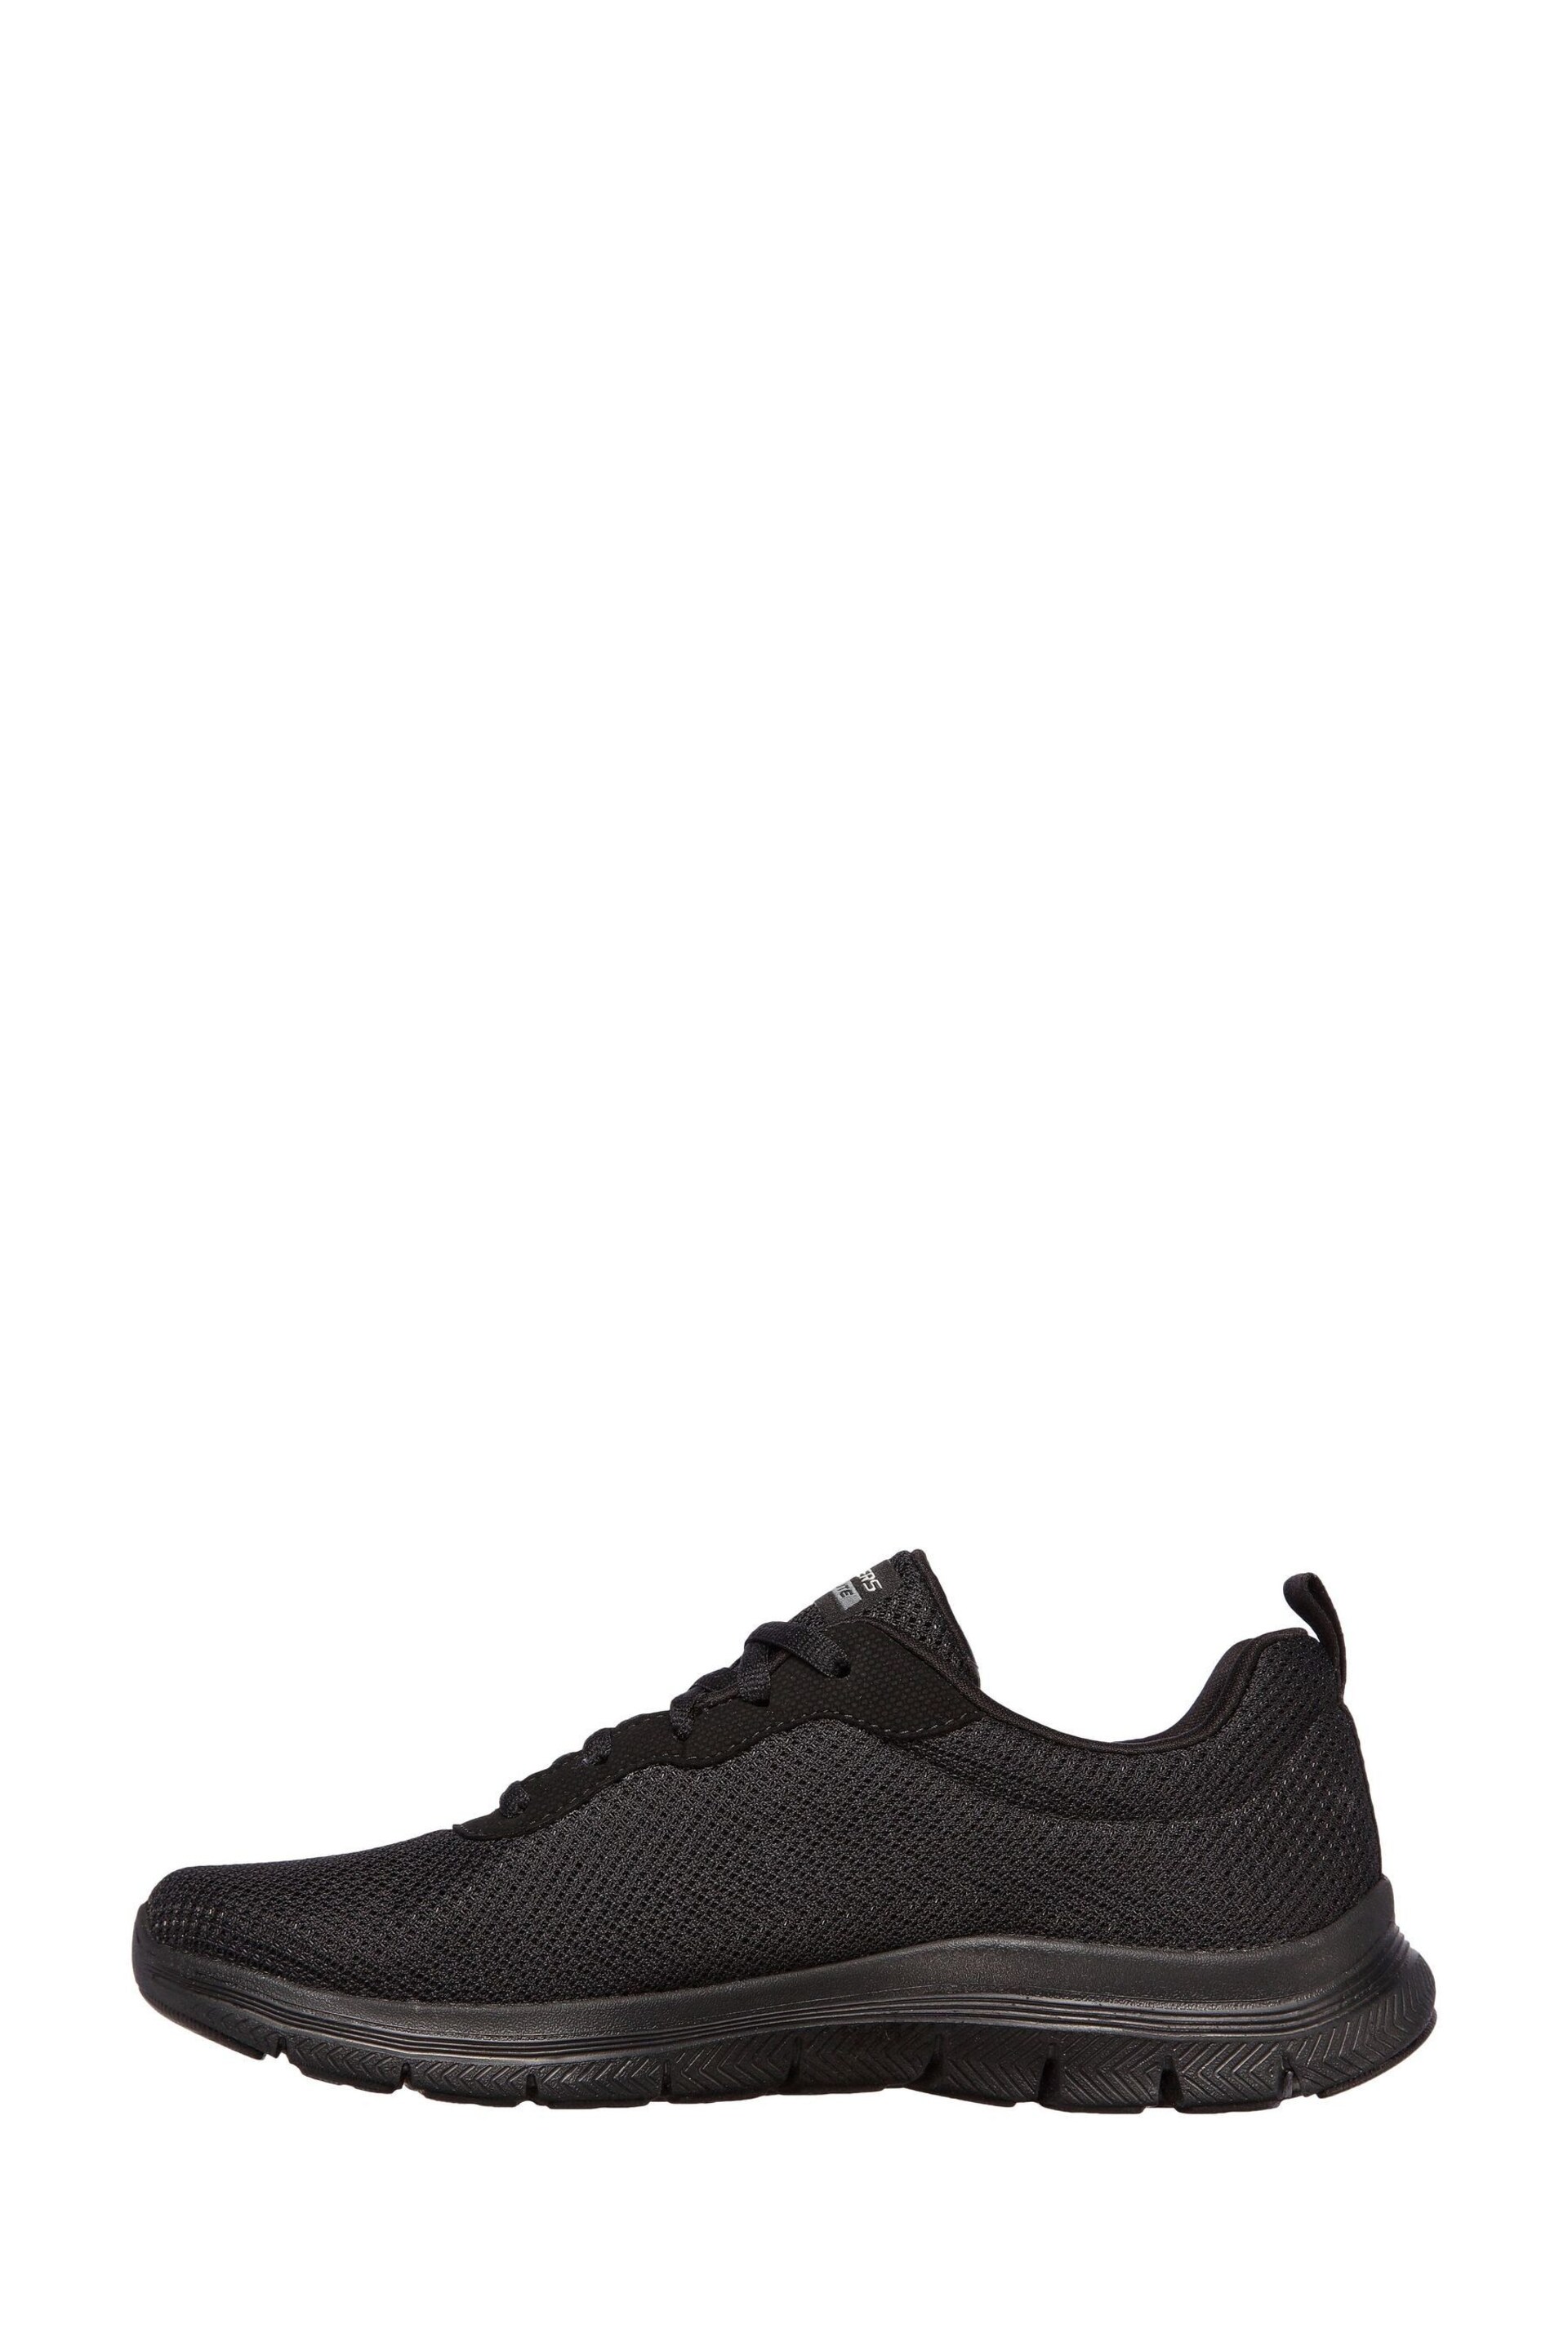 Skechers Black Flex Appeal 4.0 Brilliant View Womens Trainers - Image 2 of 8